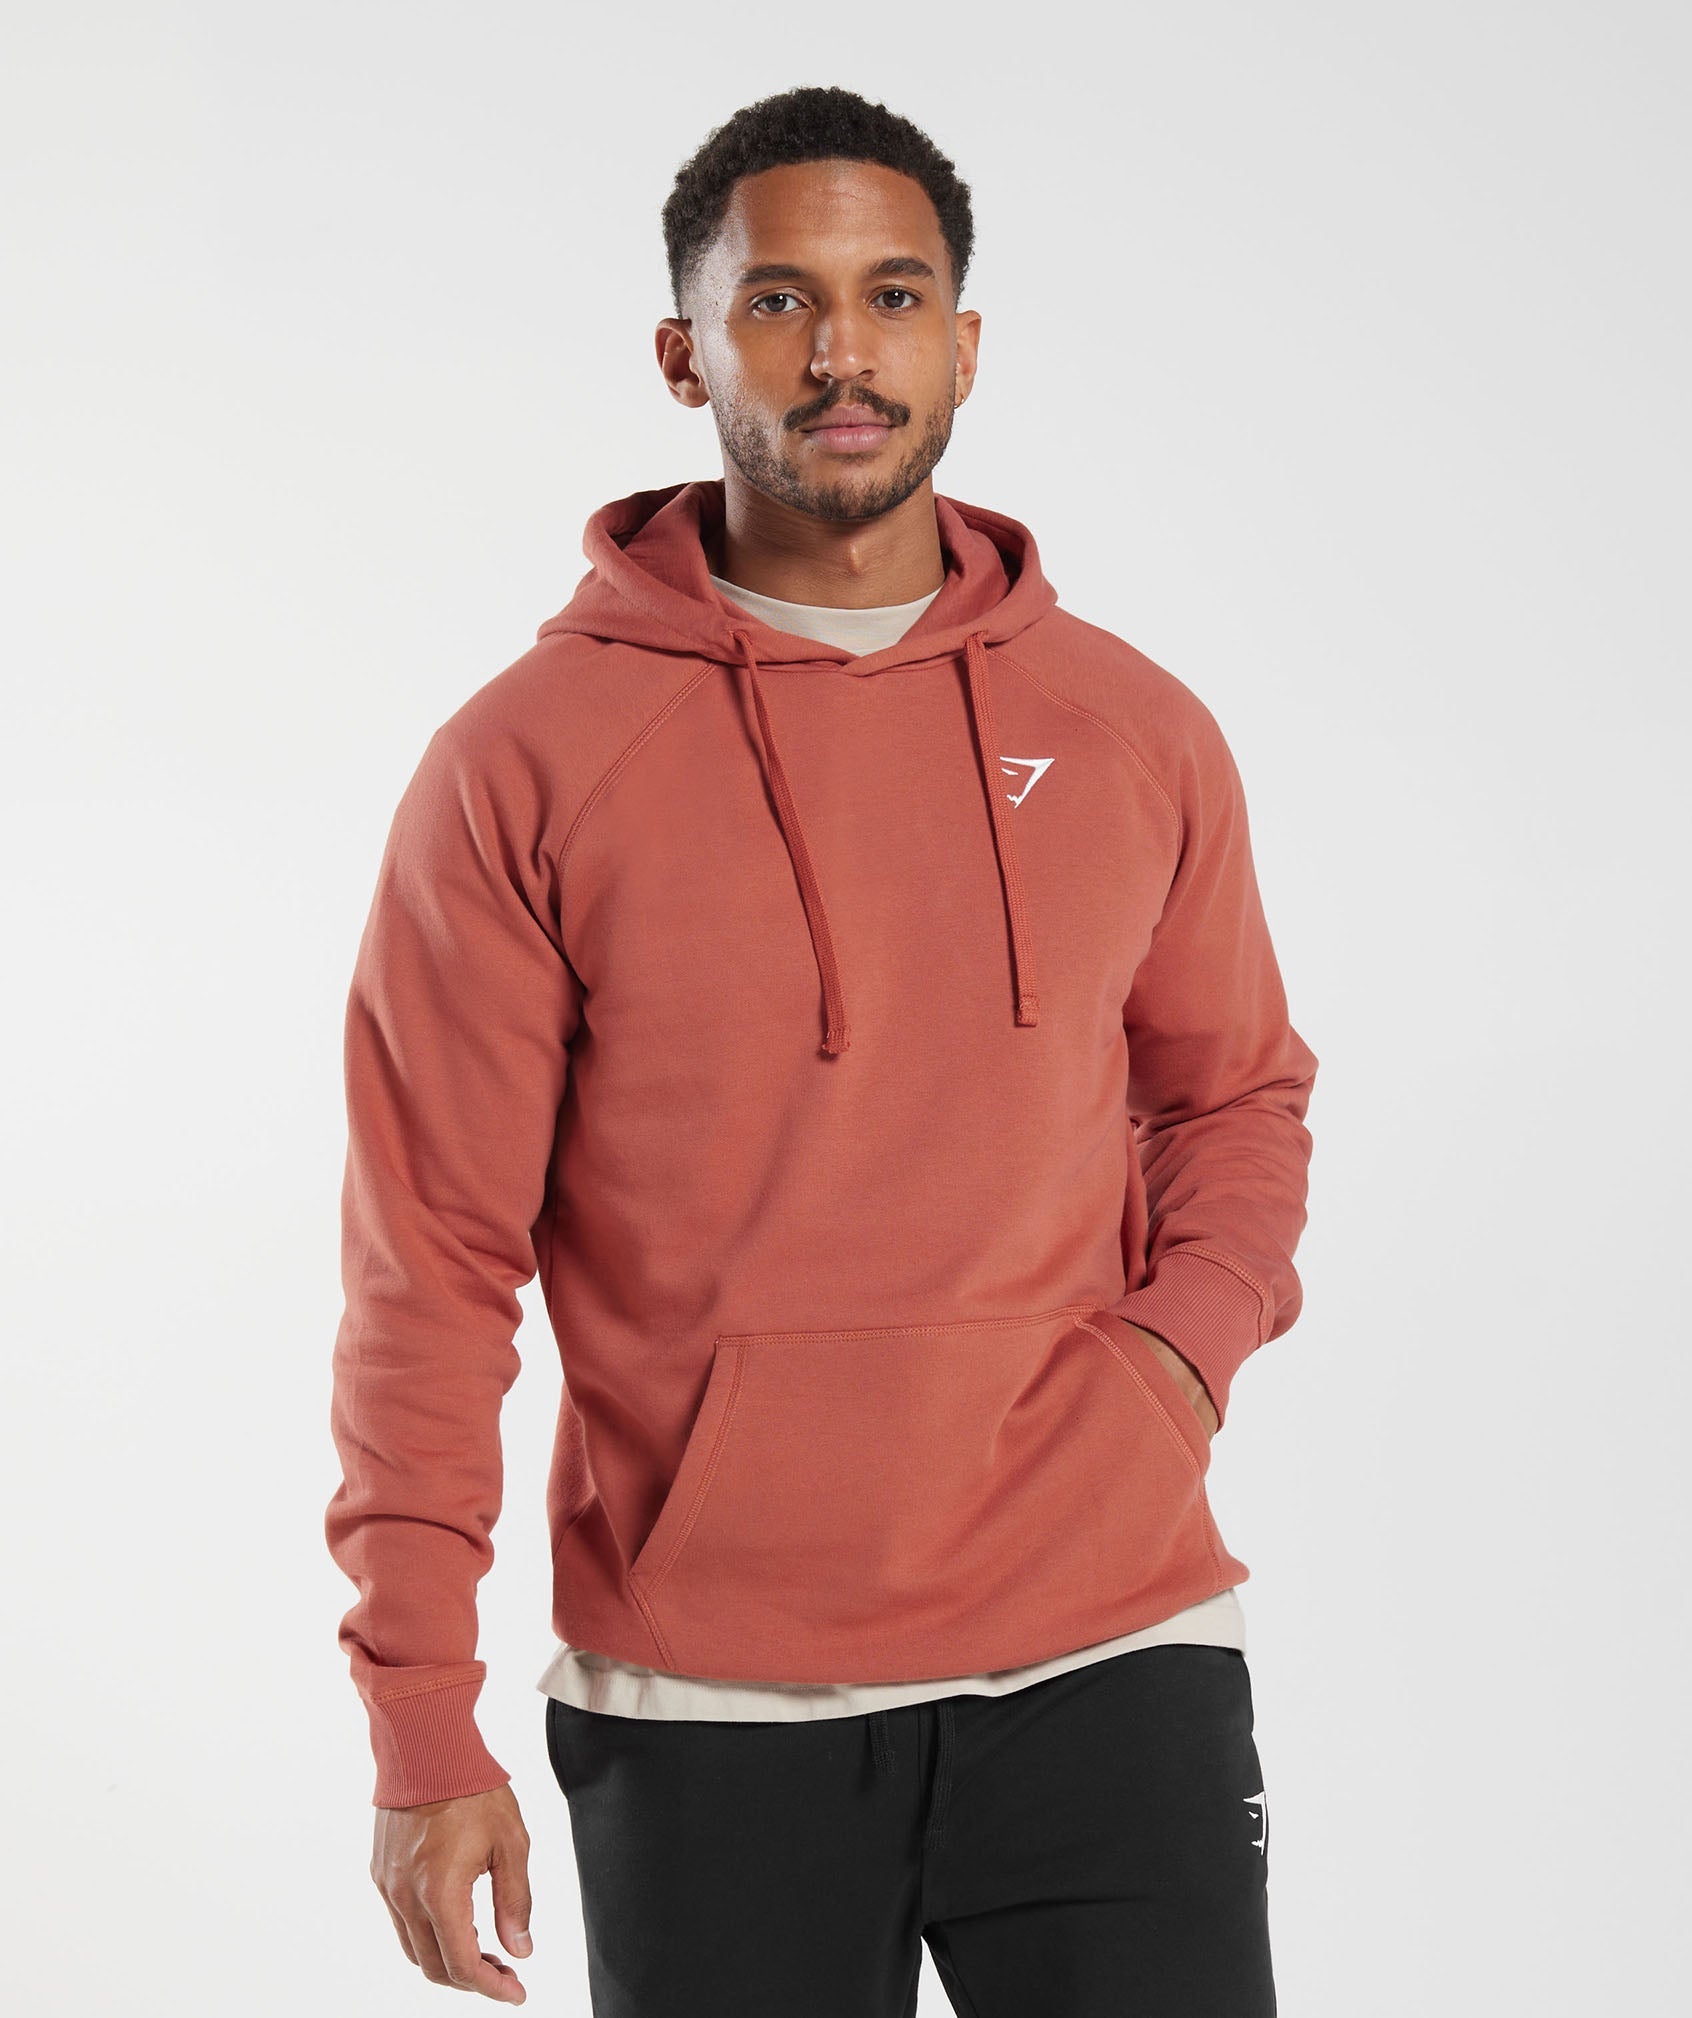 Crest Hoodie in Persimmon Red - view 1